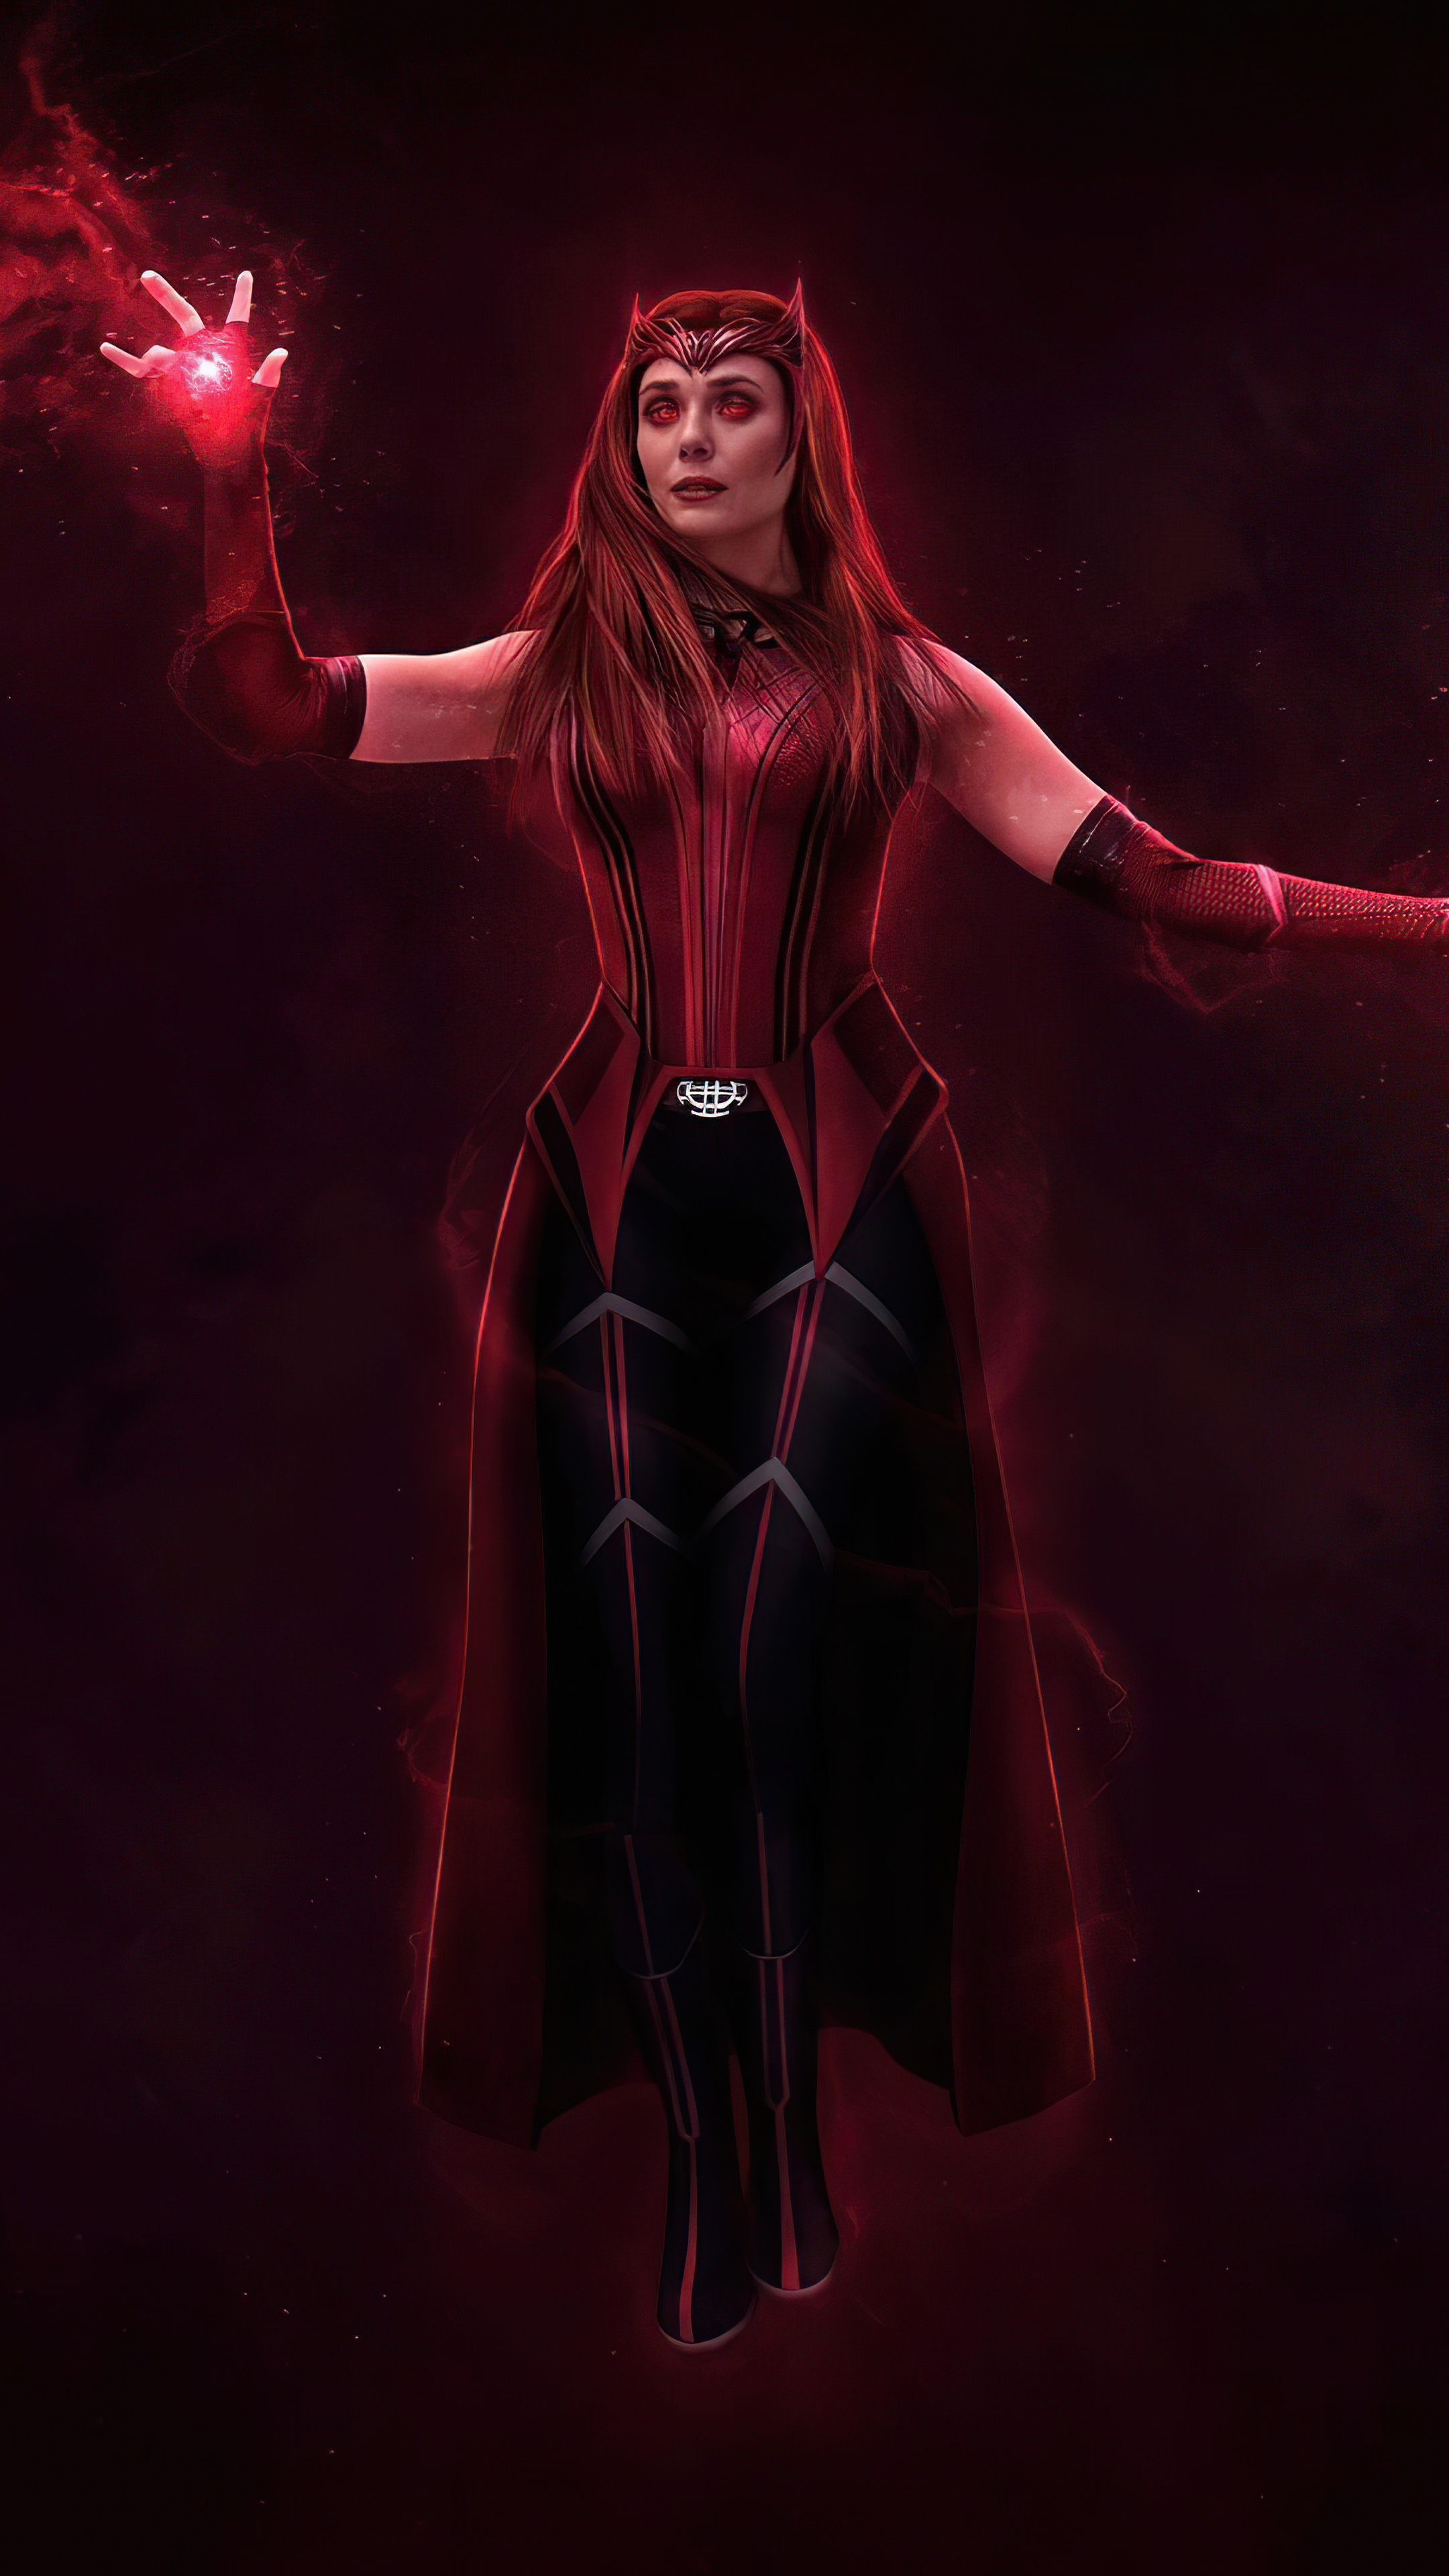 Scarlet Witch, Switched back wallpaper, Sony Xperia X wallpapers, Premium quality, 2160x3840 4K Phone